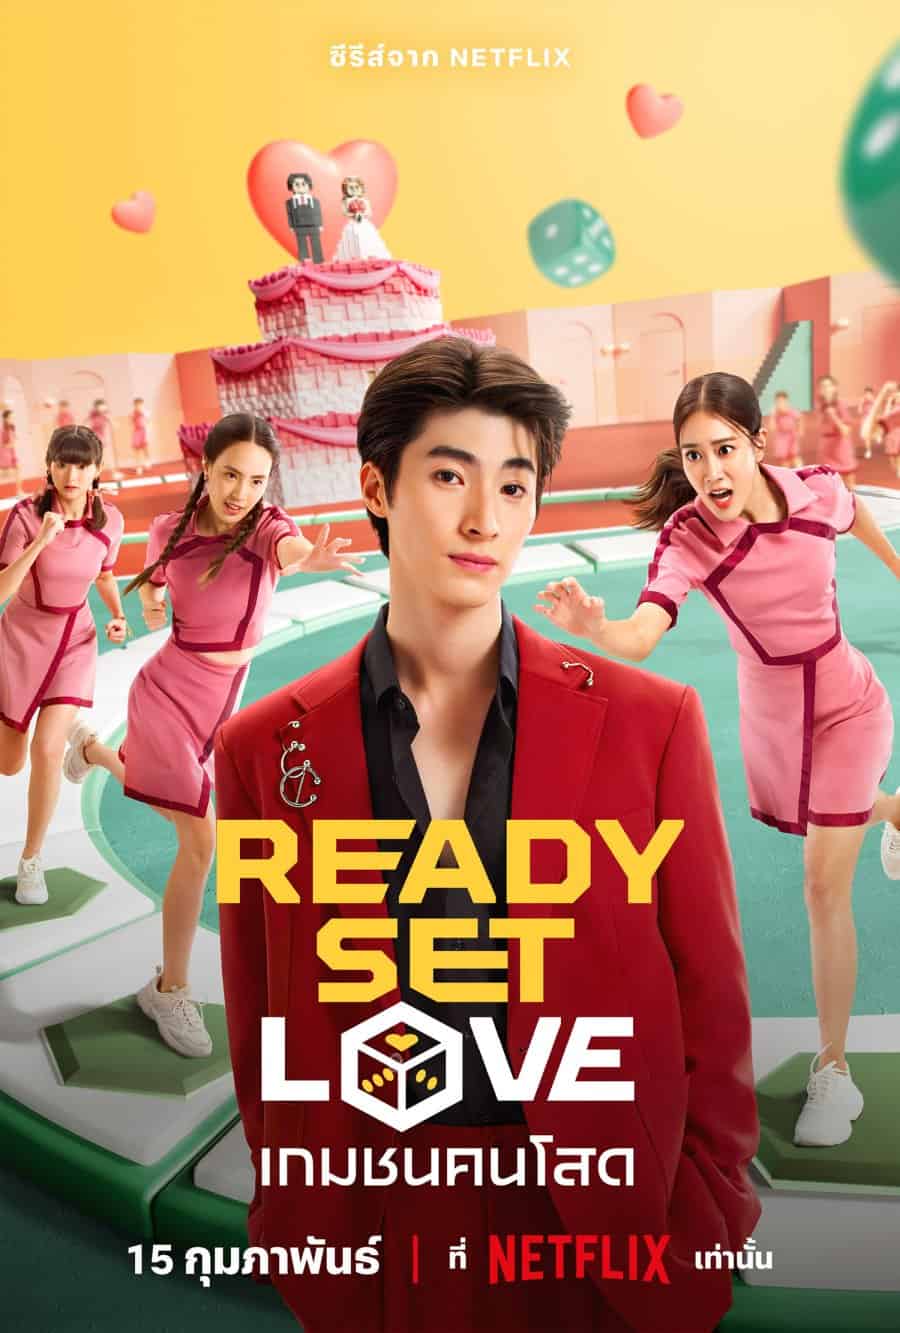 Ready, Set, Love - Sinopsis, Pemain, OST, Episode, Review